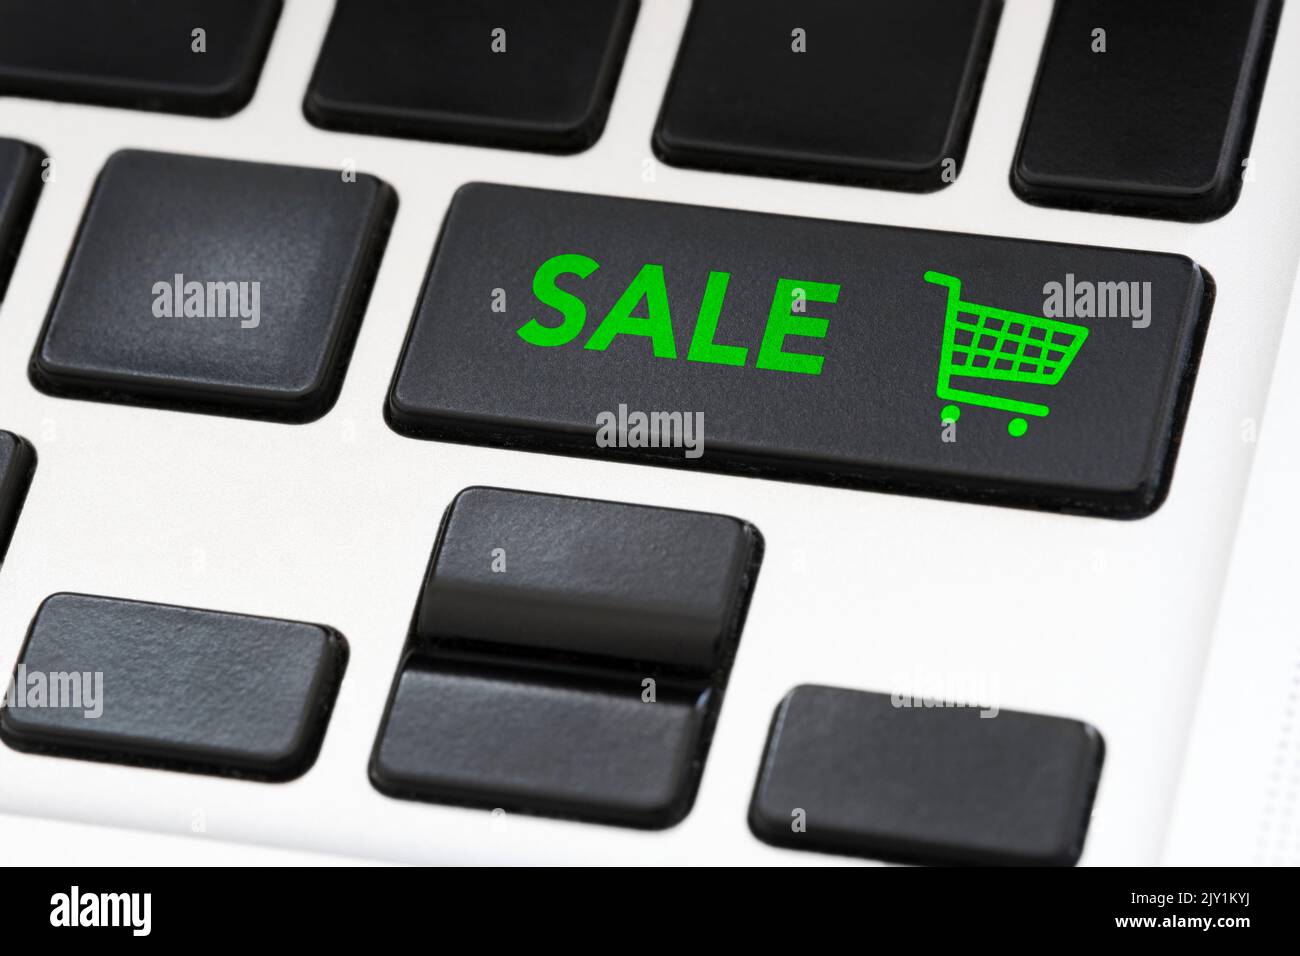 Laptop keypad button with the word Sale and a shopping cart icon. Concepts: online sales, black friday, internet discounts, seasonal rebates. Stock Photo